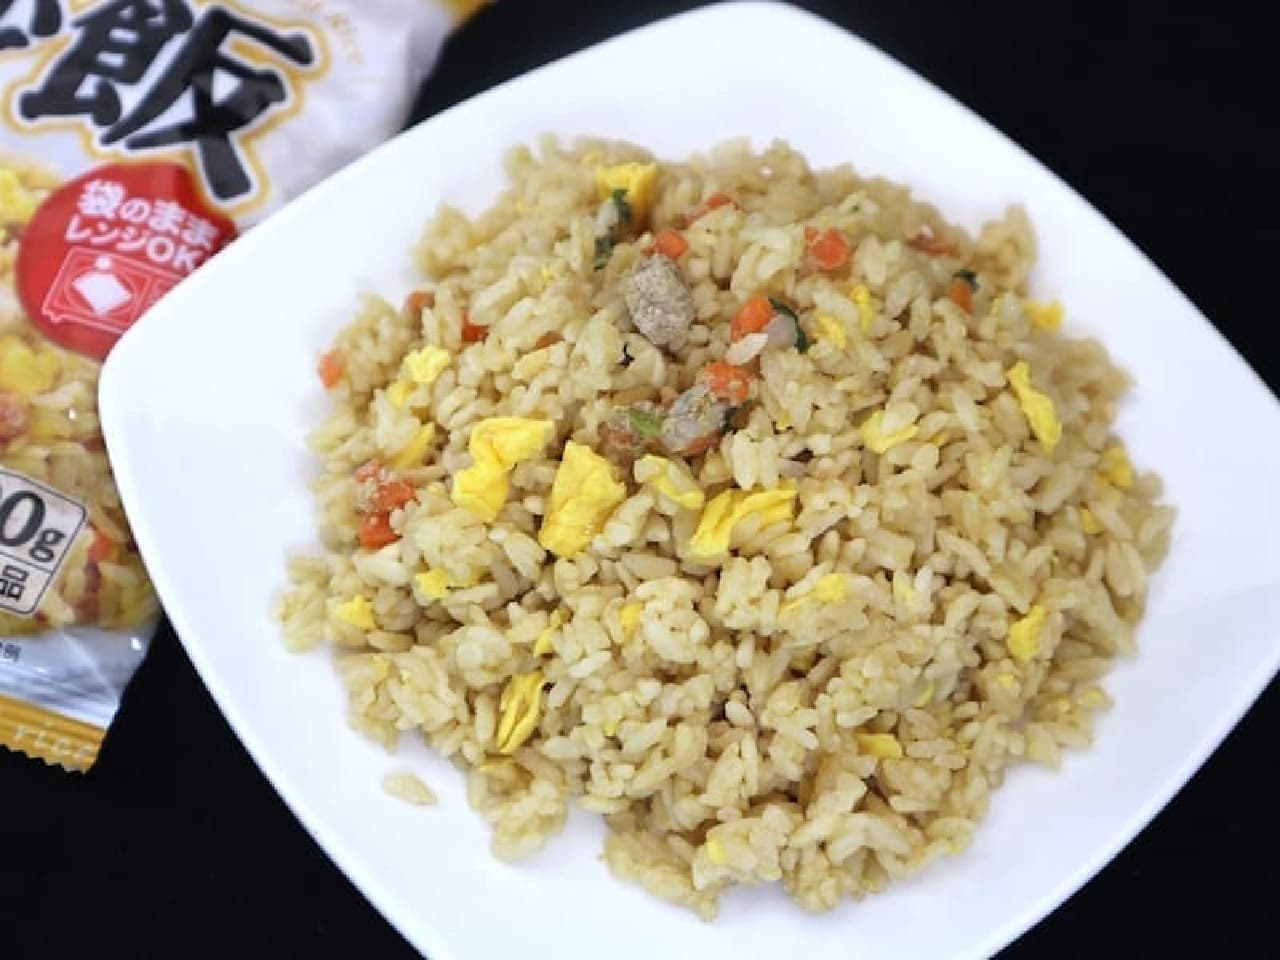 Lawson Store 100 "VL Fried Rice"